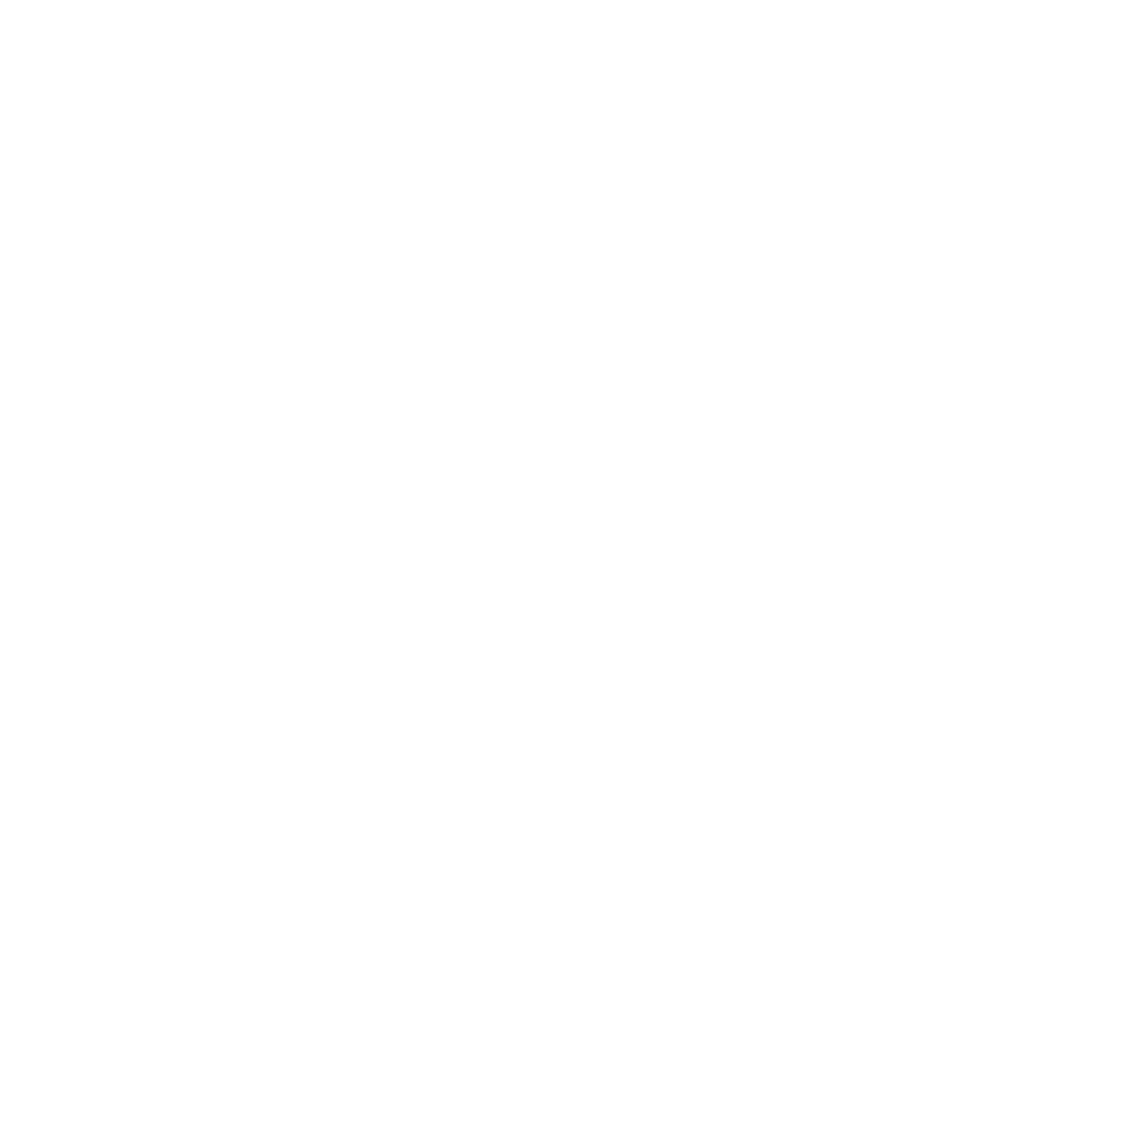 The Ouroboros Triquetra Is The Universally Recognized Paulaner